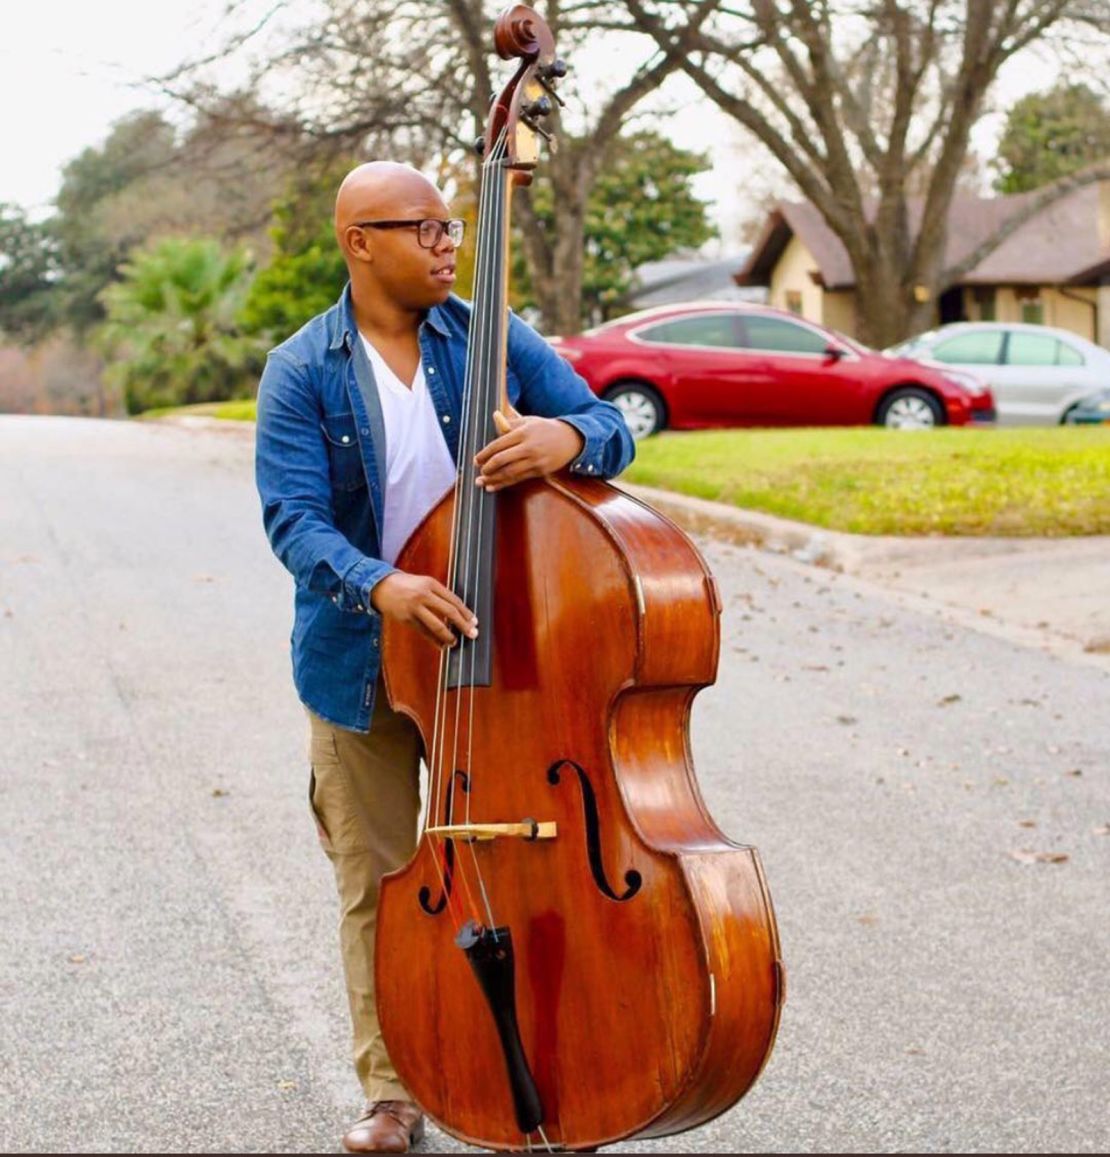 Draylen Mason was a promising student and bassist in a youth orchestra. 